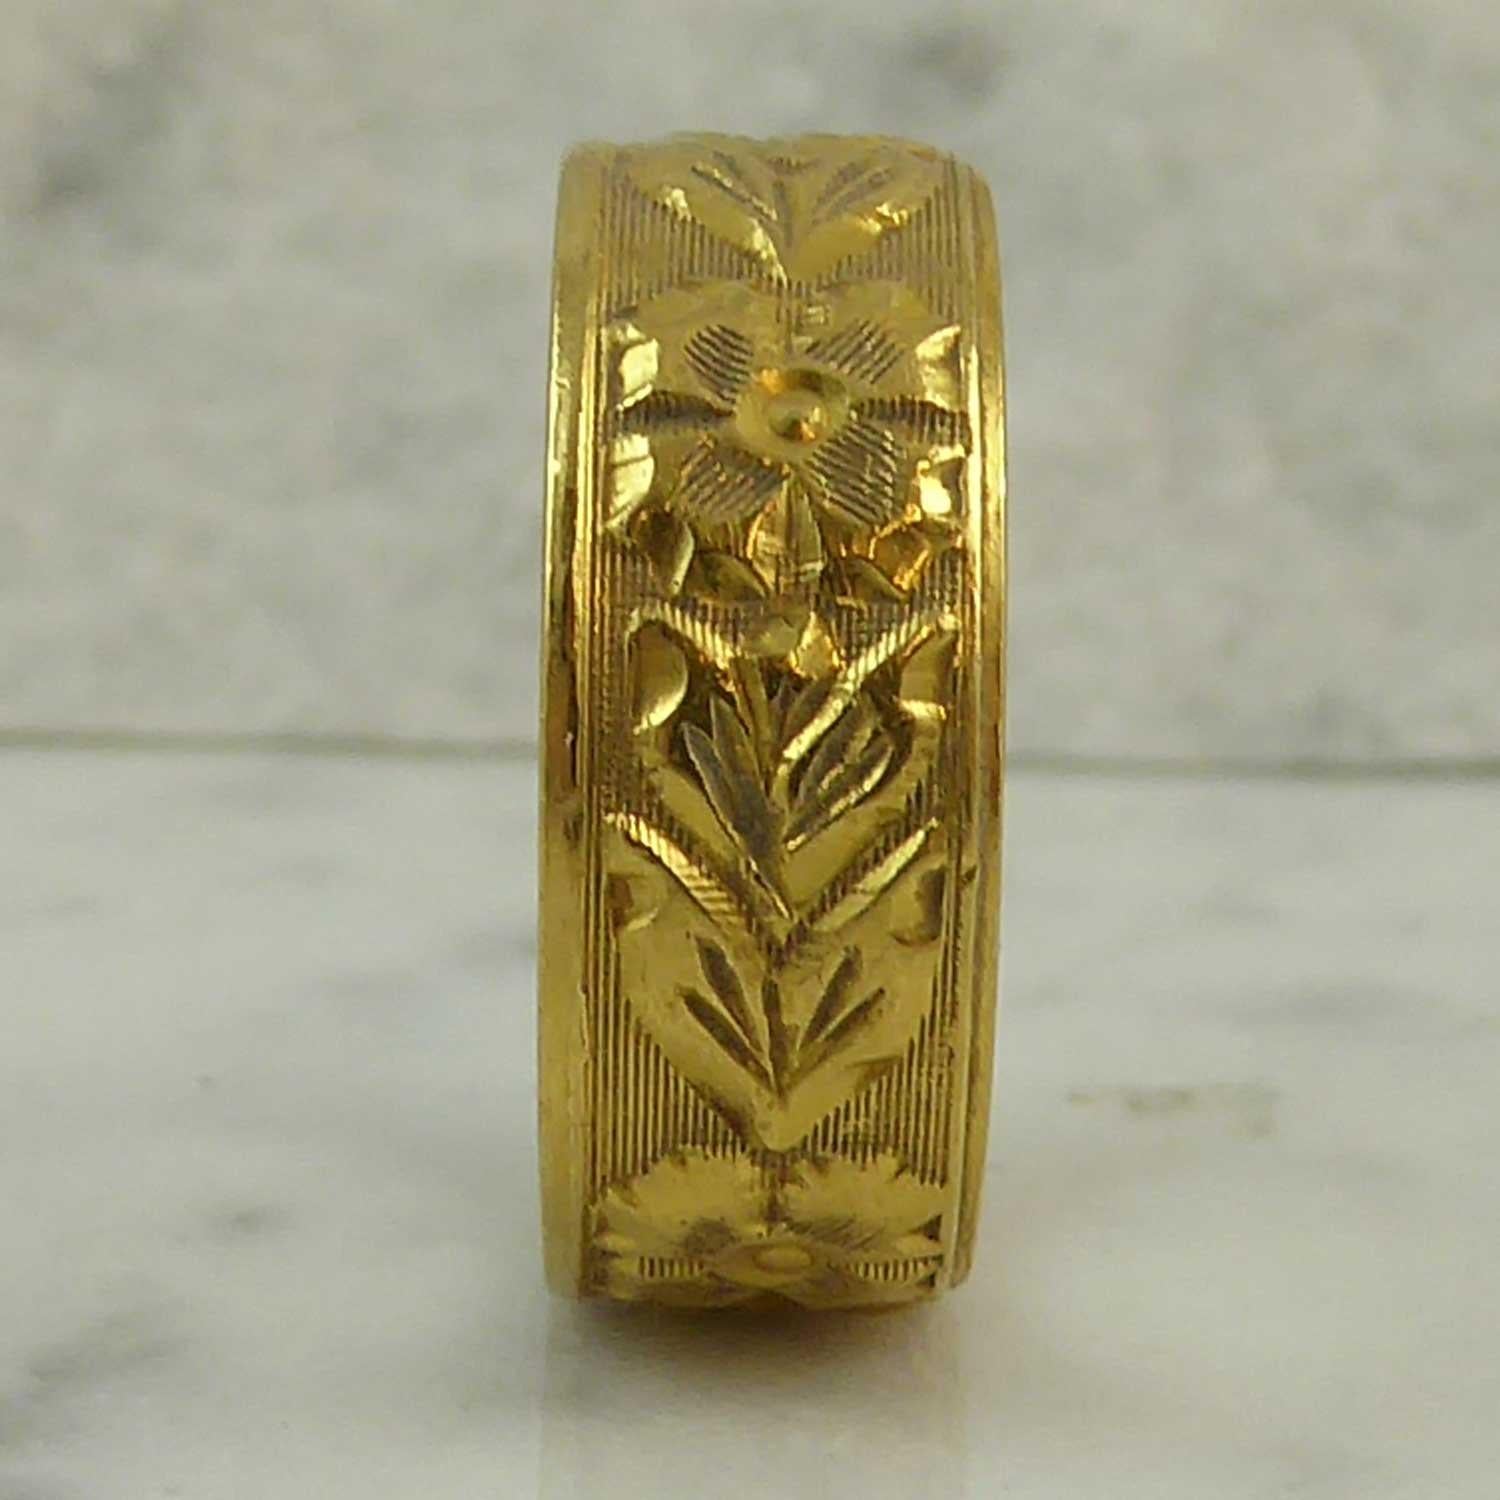 This is a marvellous vintage wedding ring from the 1960s.  Measuring approx. 0.32 inch wide, the ring has a flower and leaf design very nicely engraved all around against a hatched patterned backgound with a plain polished line to each edge of the